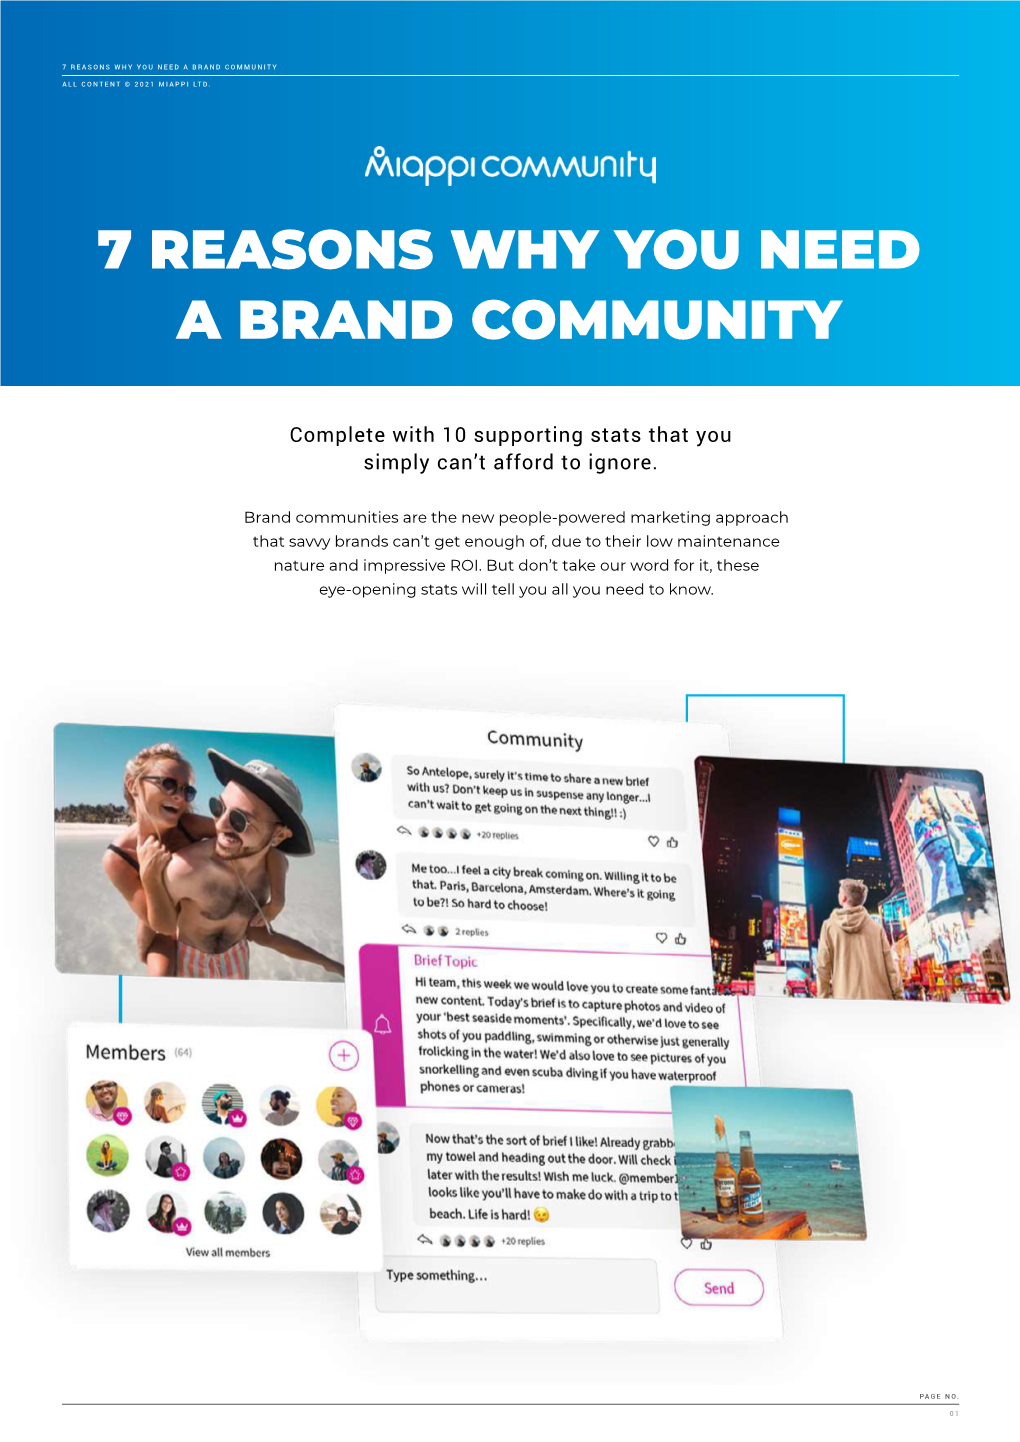 7 Reasons Why You Need a Brand Community